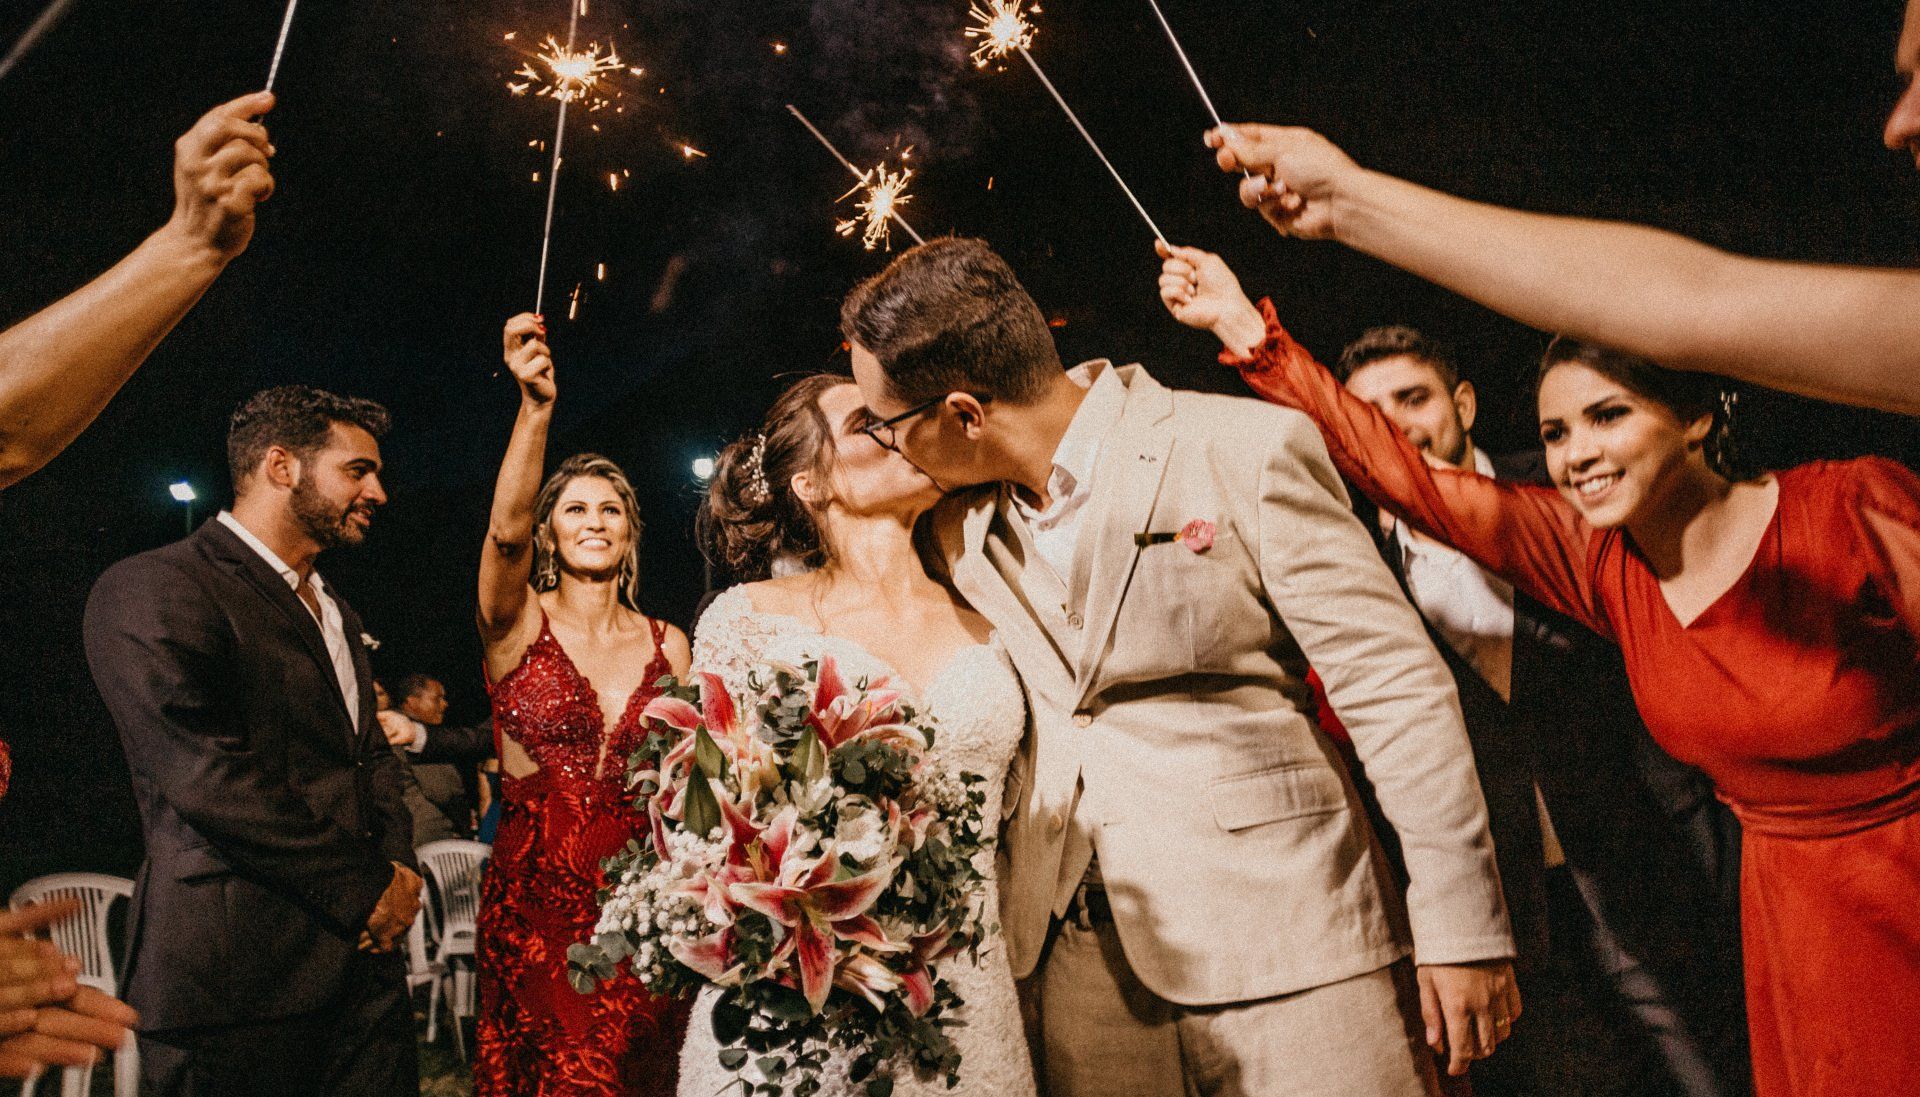 A bride and groom exiting their wedding beneath sparklers